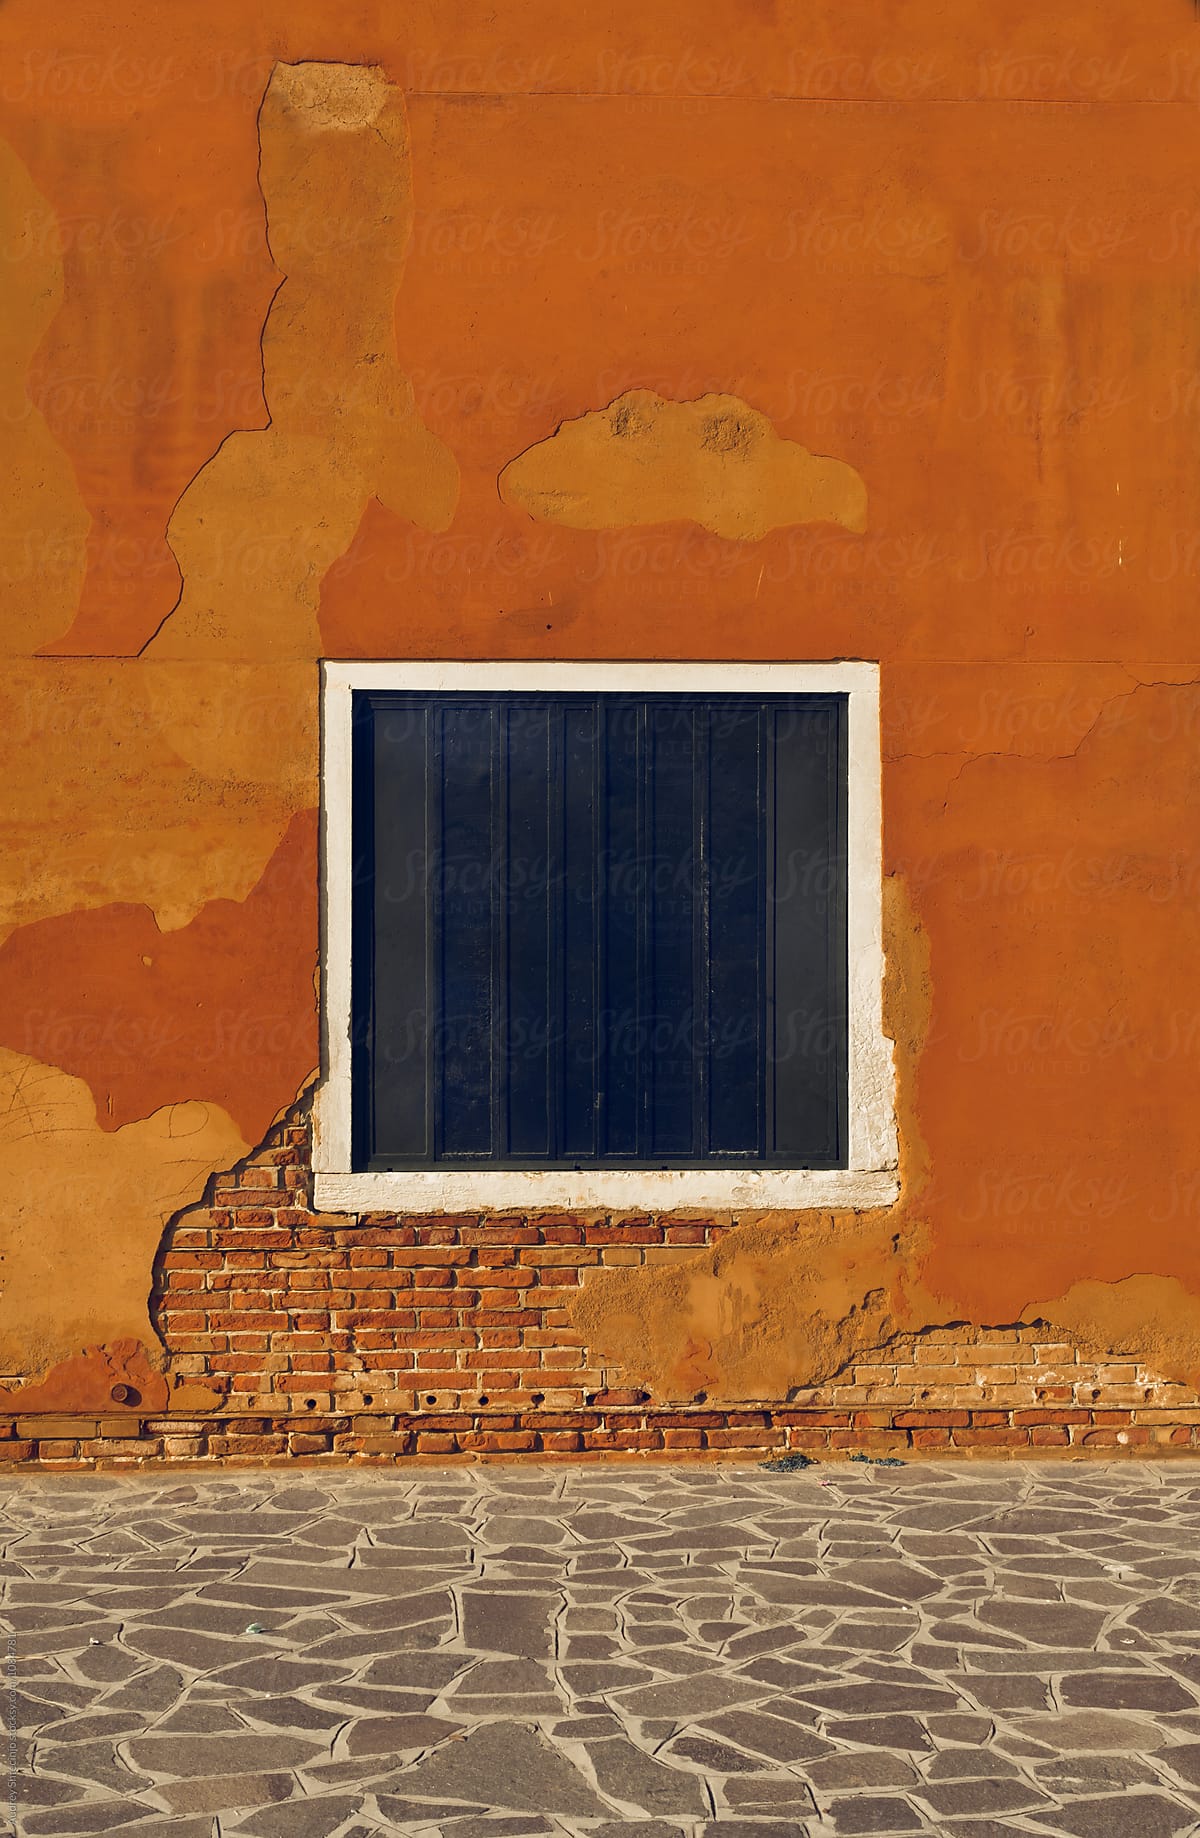 Mediterranean house detail/blue square window/opening on rustic orange wall.Venice/Italy